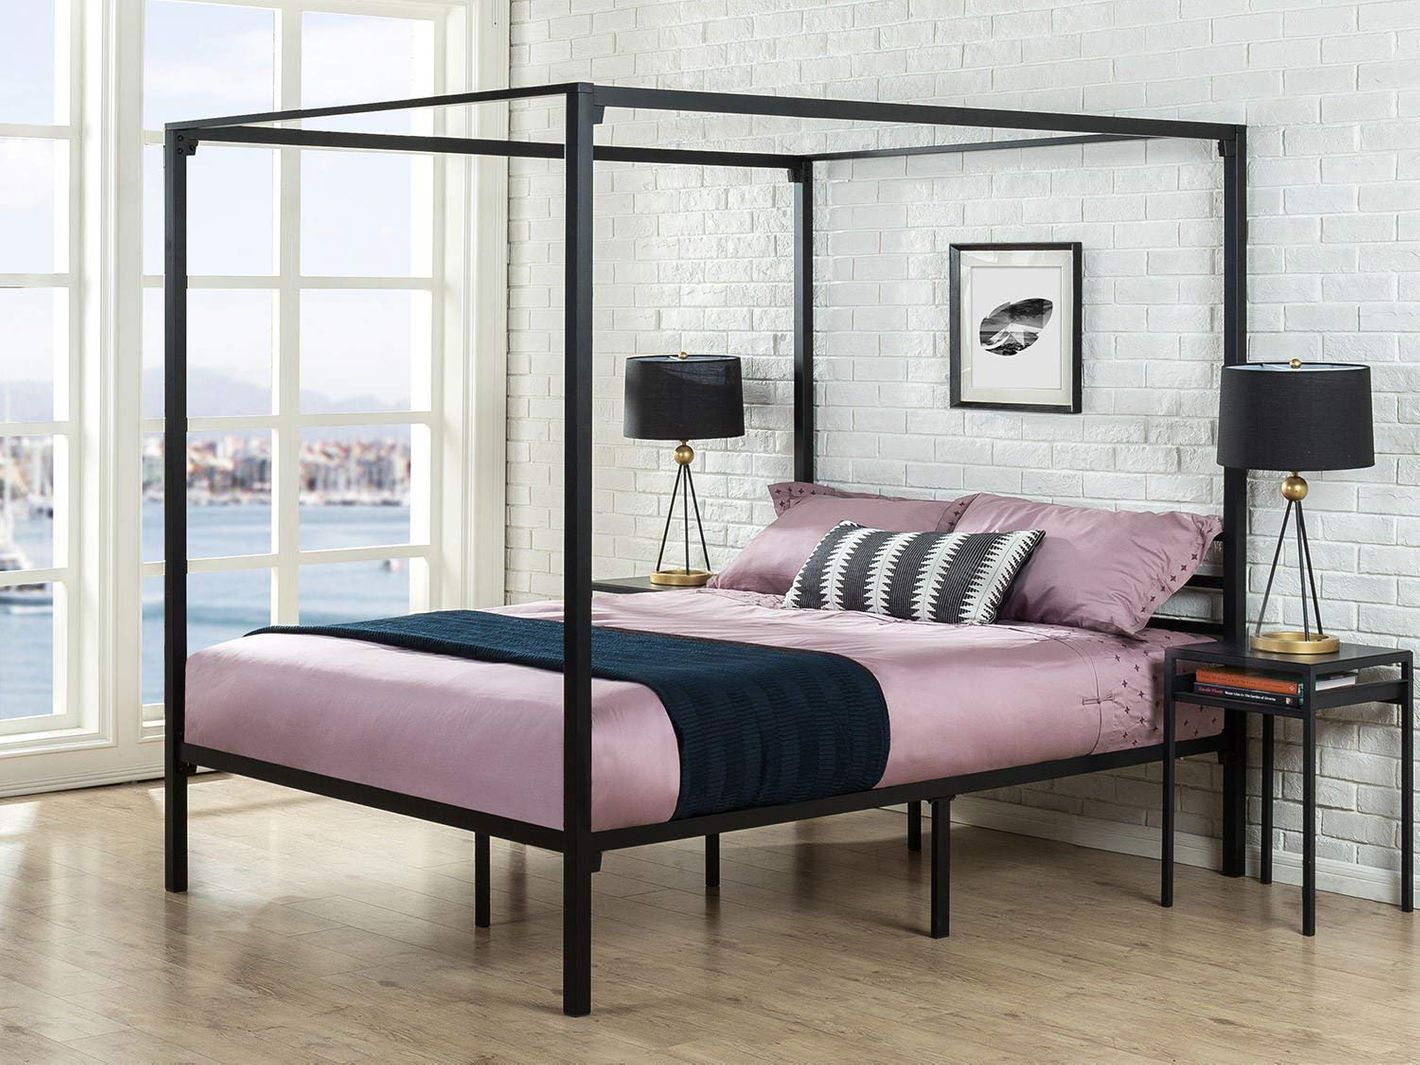 19 Best Metal Bed Frames 2020 The, Very Tall Bed Frame